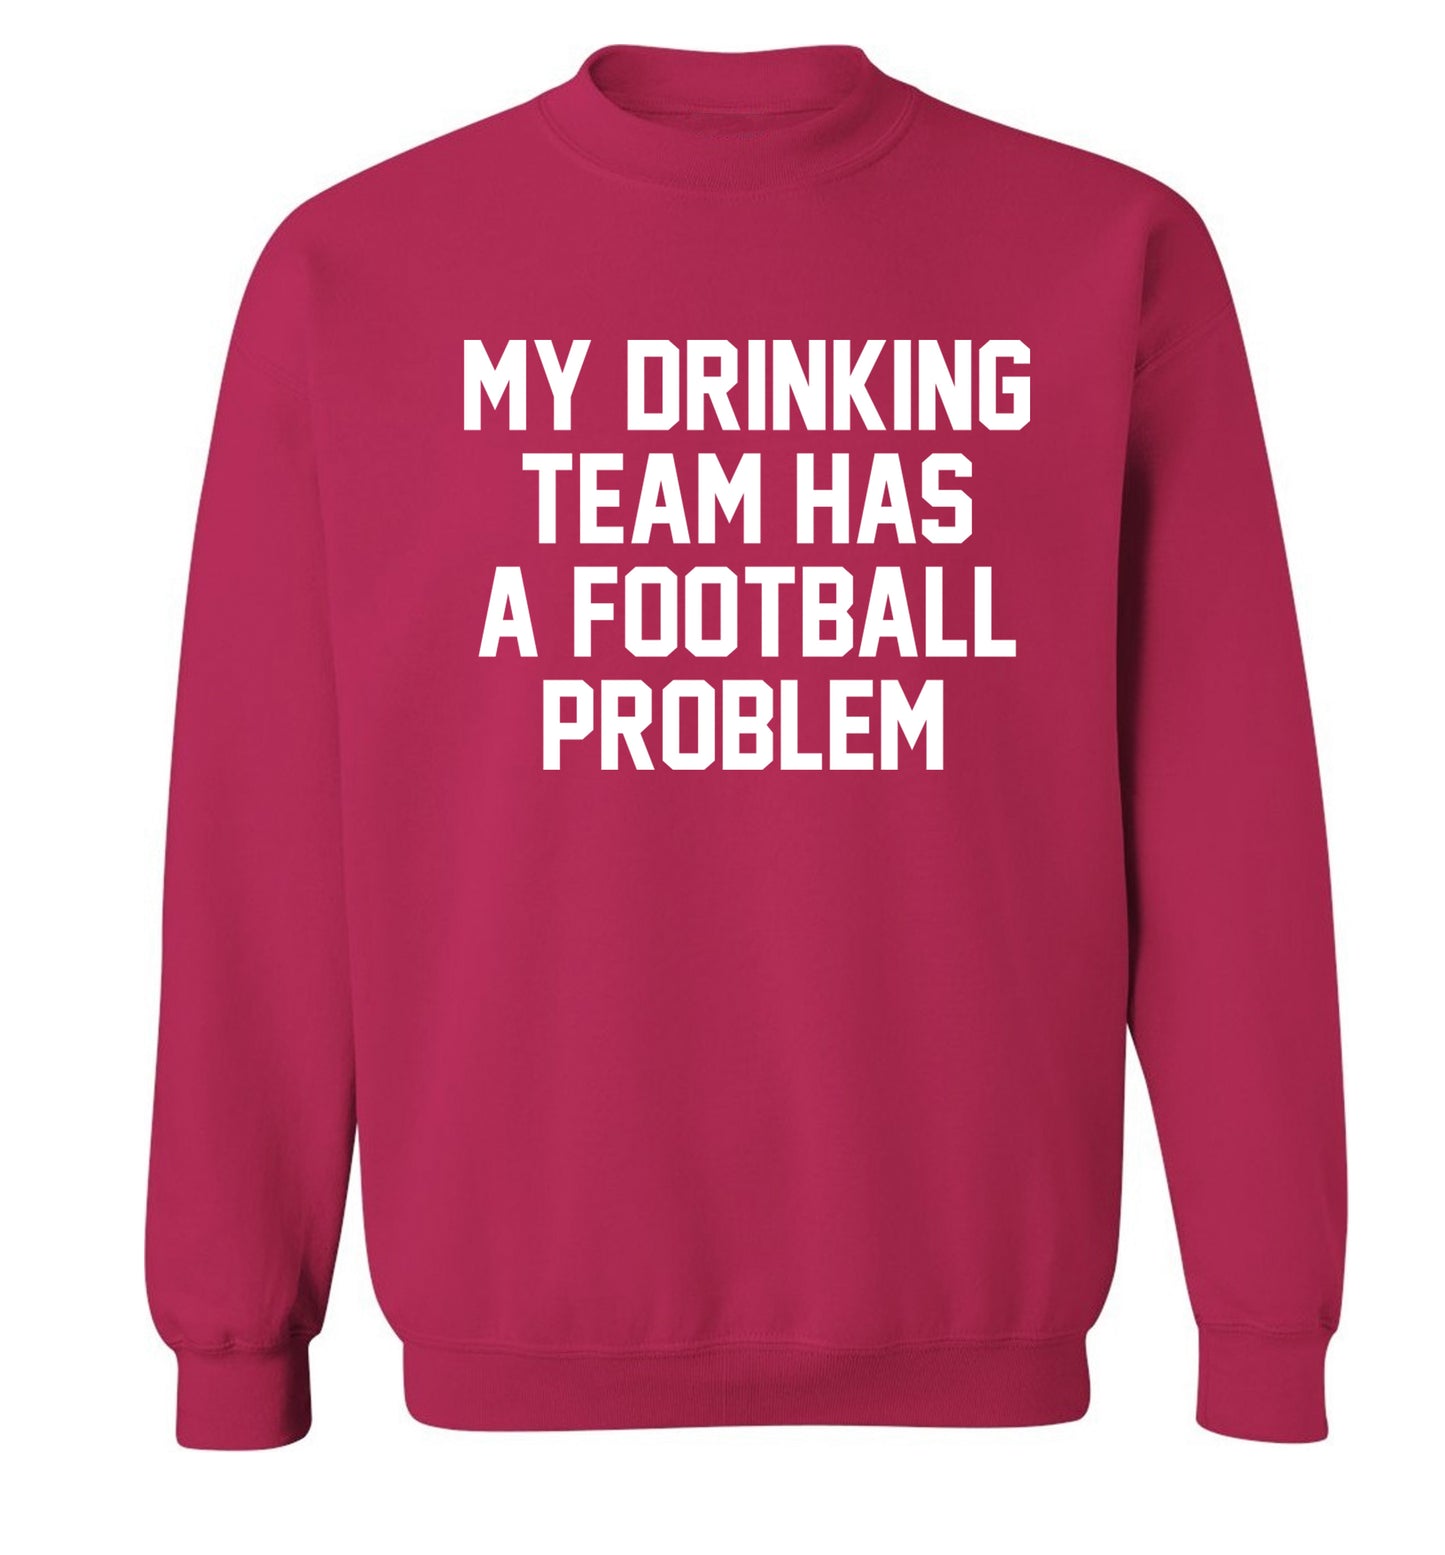 My drinking team has a football problem! Adult's unisexpink Sweater 2XL